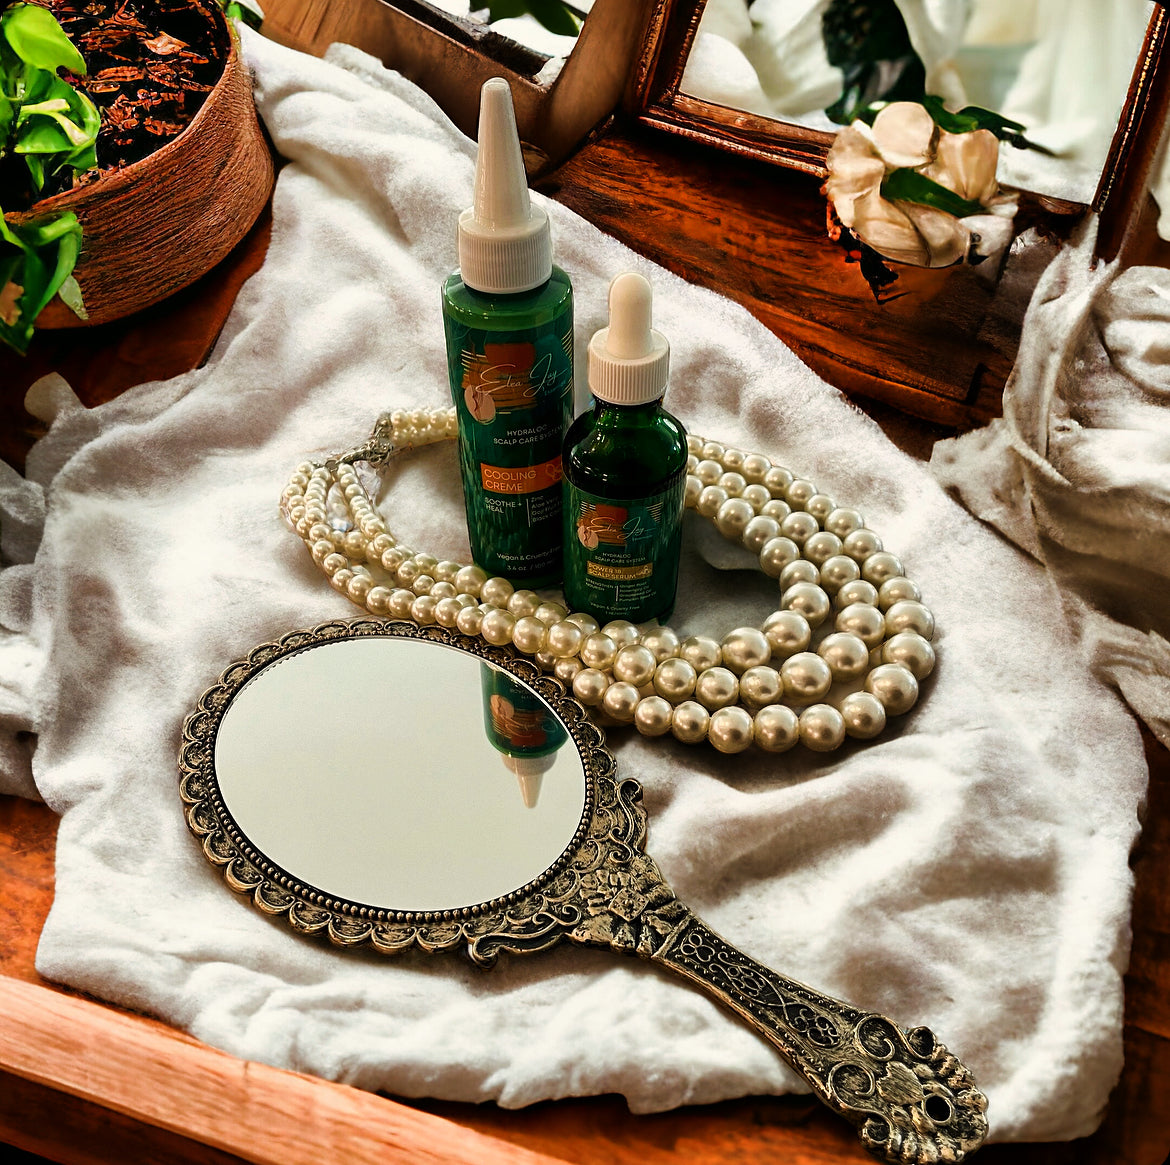 Image of The Hydraloc Power18 Serum and the Hydraloc Cooling Creme on a wooden vanity.